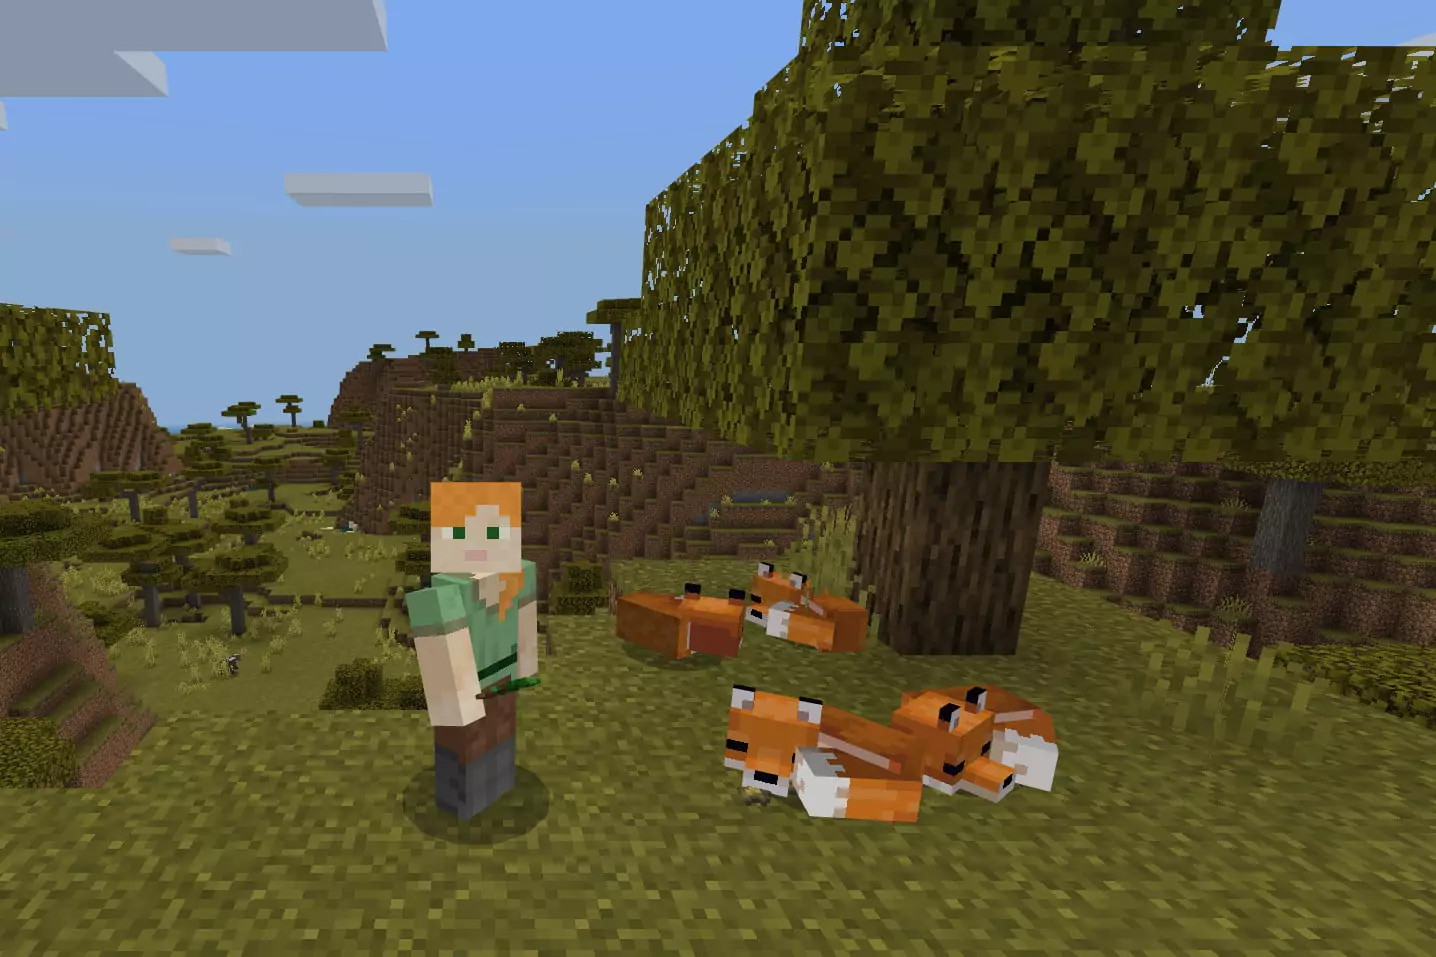 How to tame a Fox in Minecraft?